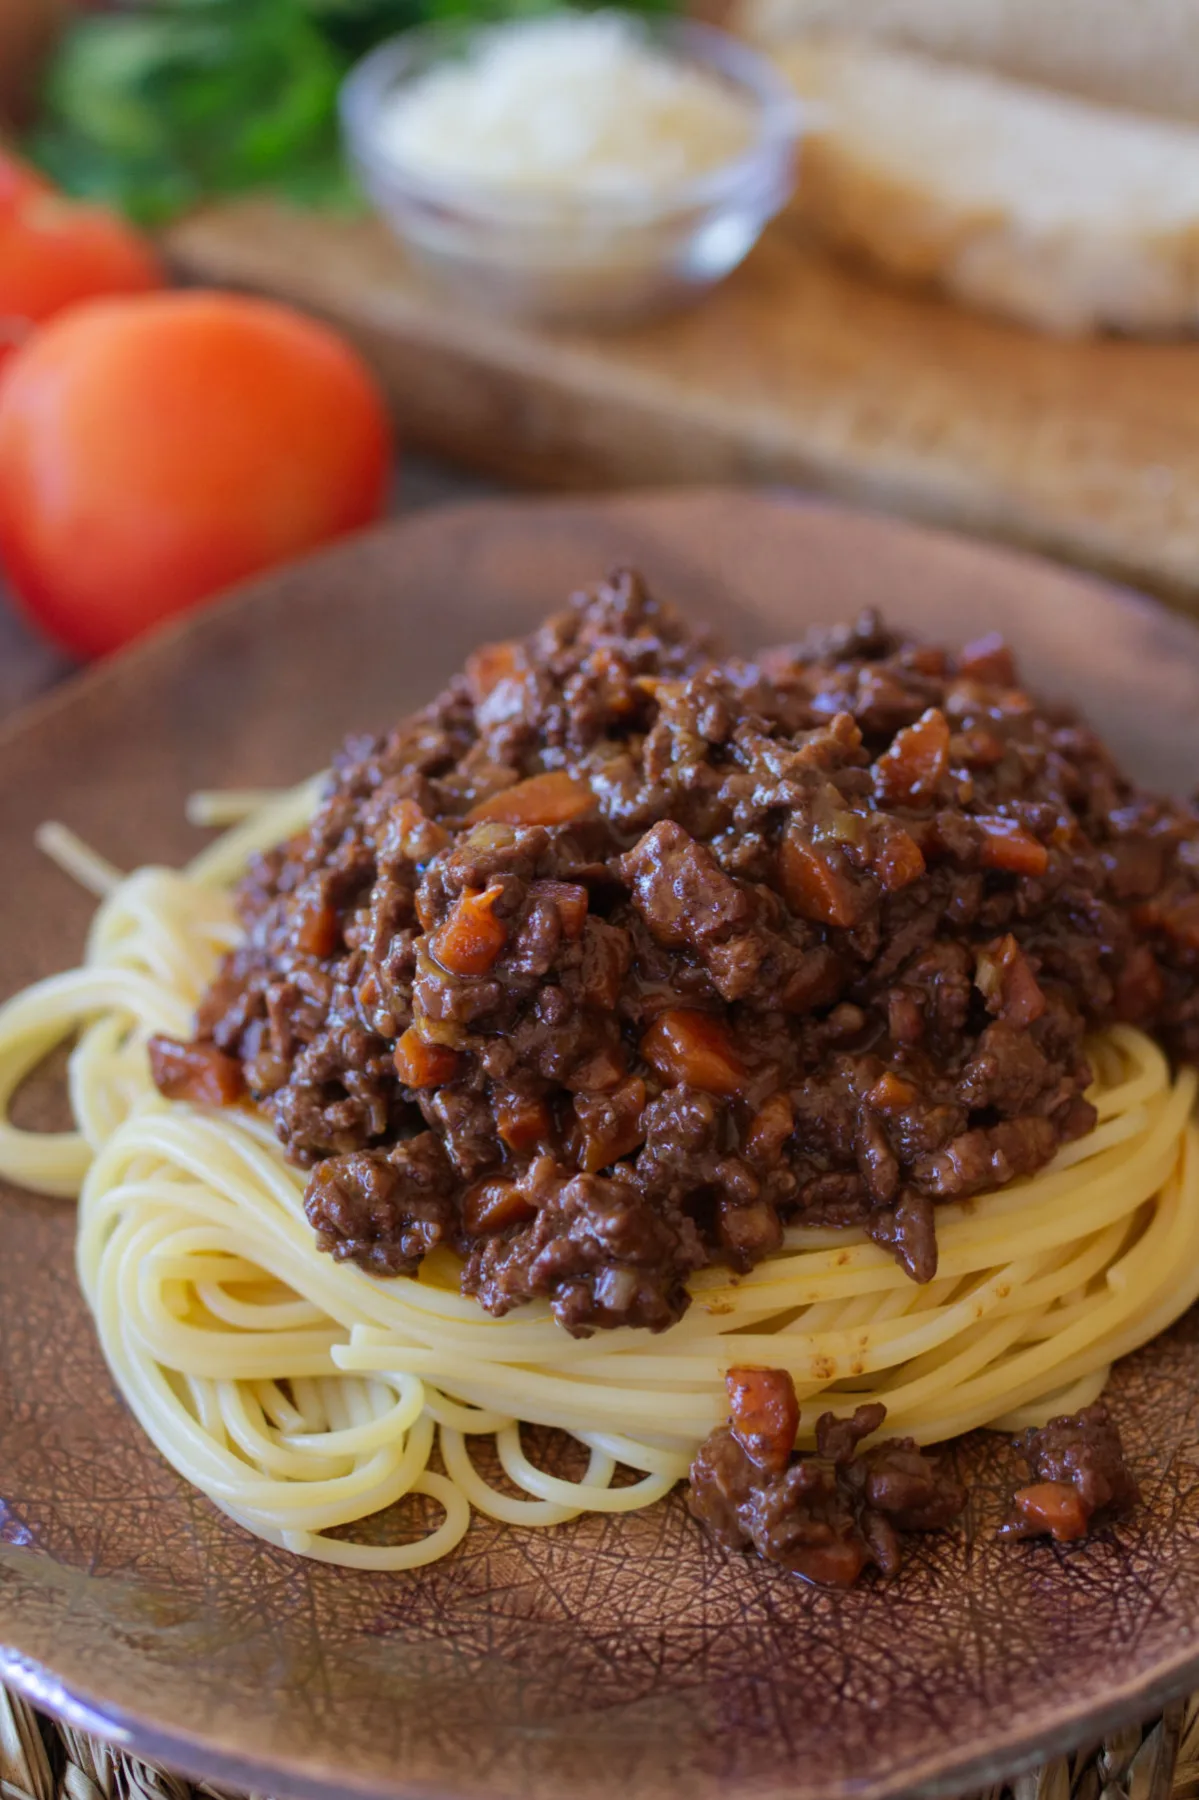 A plate of spaghetti and bolognese sauce.